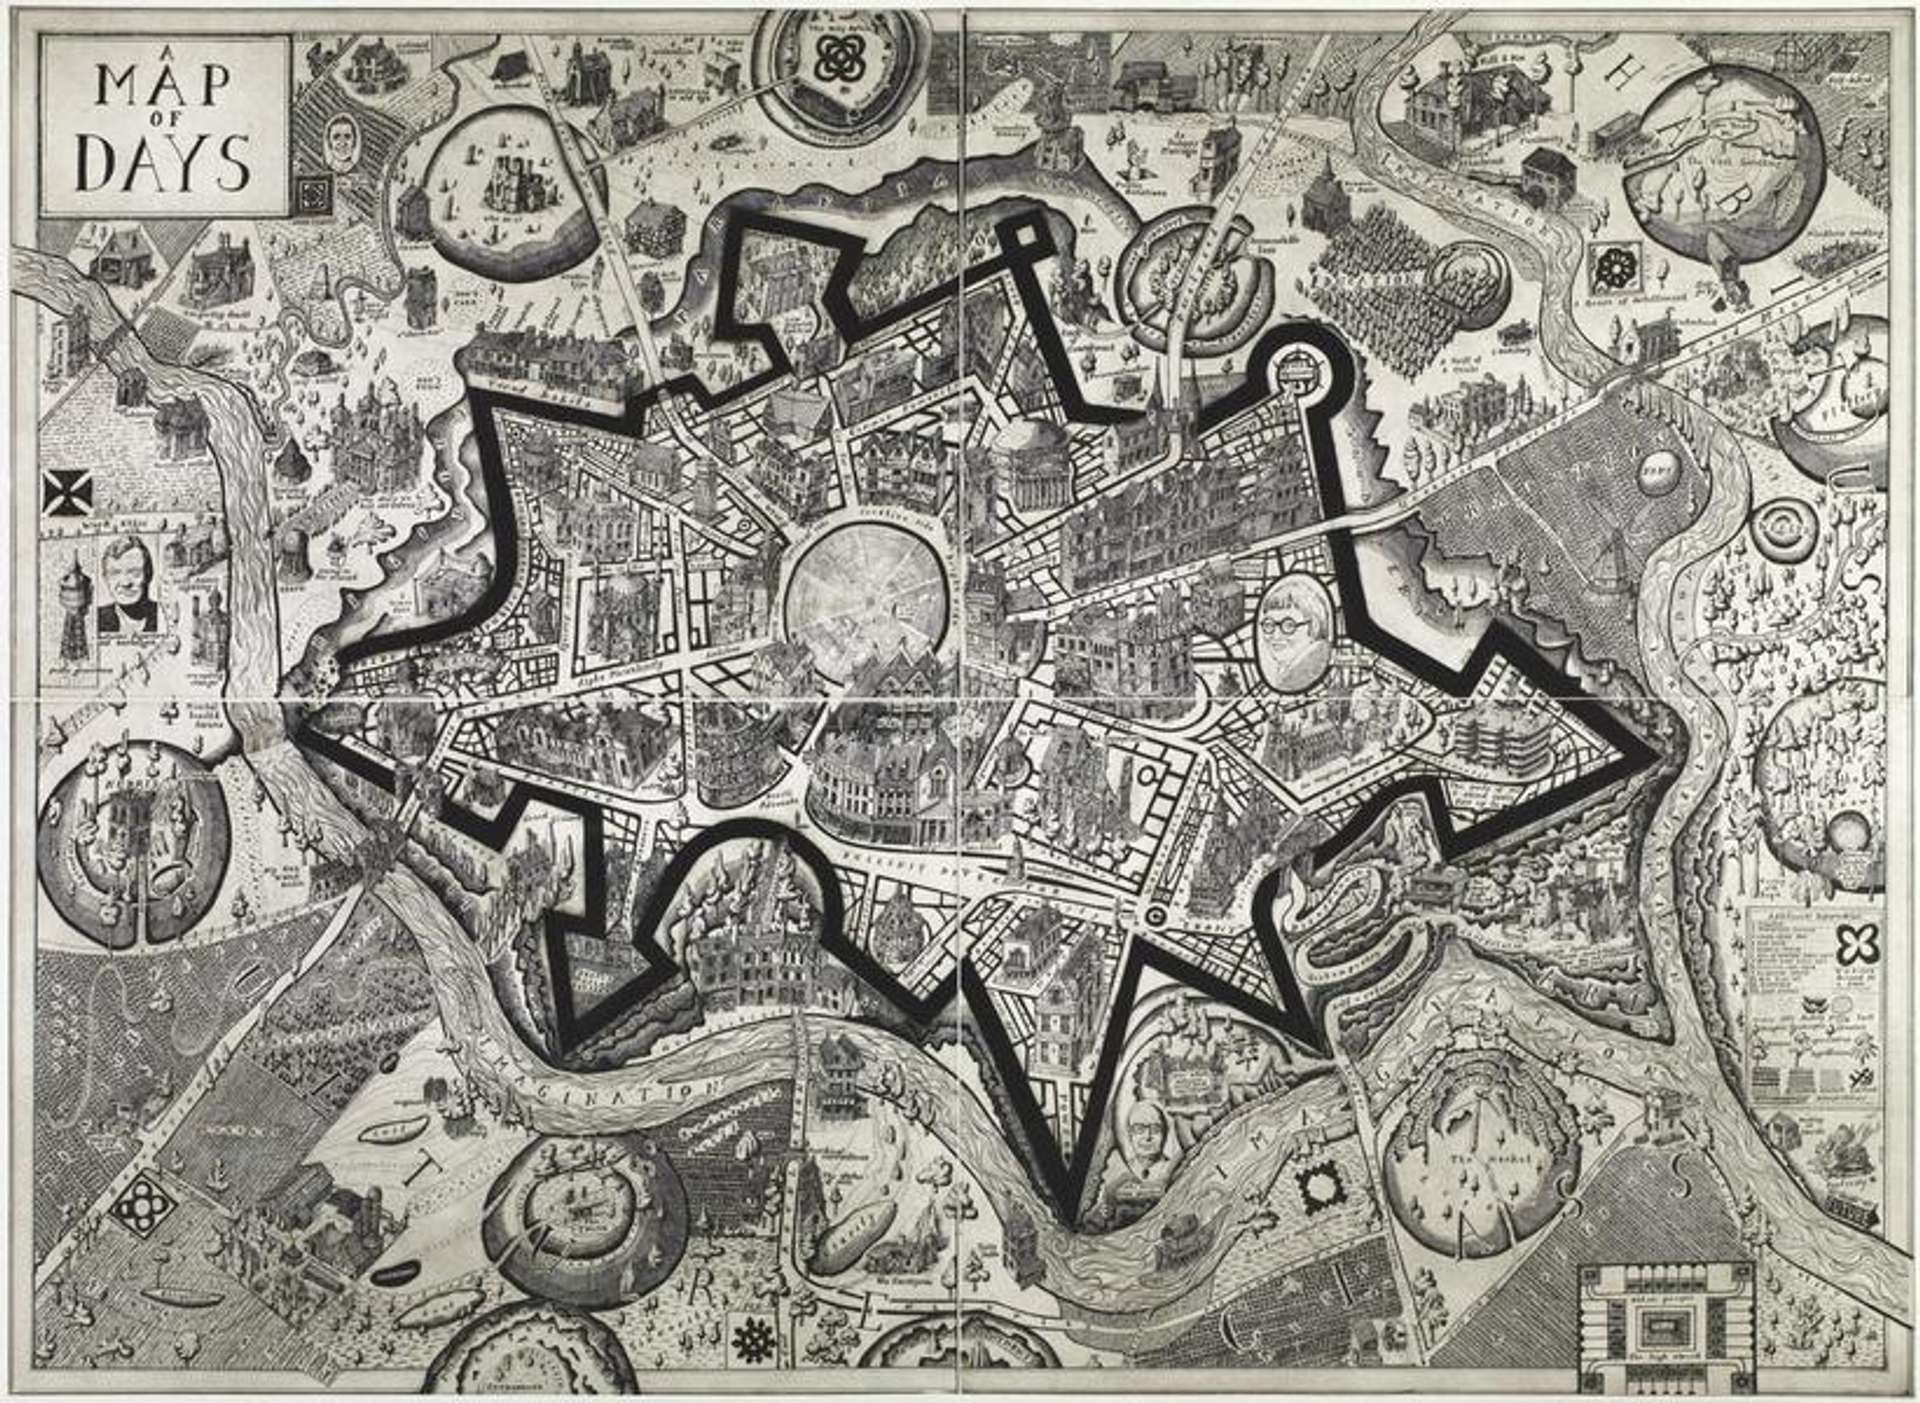 A cartographic style map in grey pencil, featuring portraits of Perry’s wife Philippa Perry, Tour de France winner Bradley Wiggins, the poet Philip Larkin and the art critic Robert Hughes. Other images in the map denote Perry’s interests, habits, psychological traits and even some of his medical history.